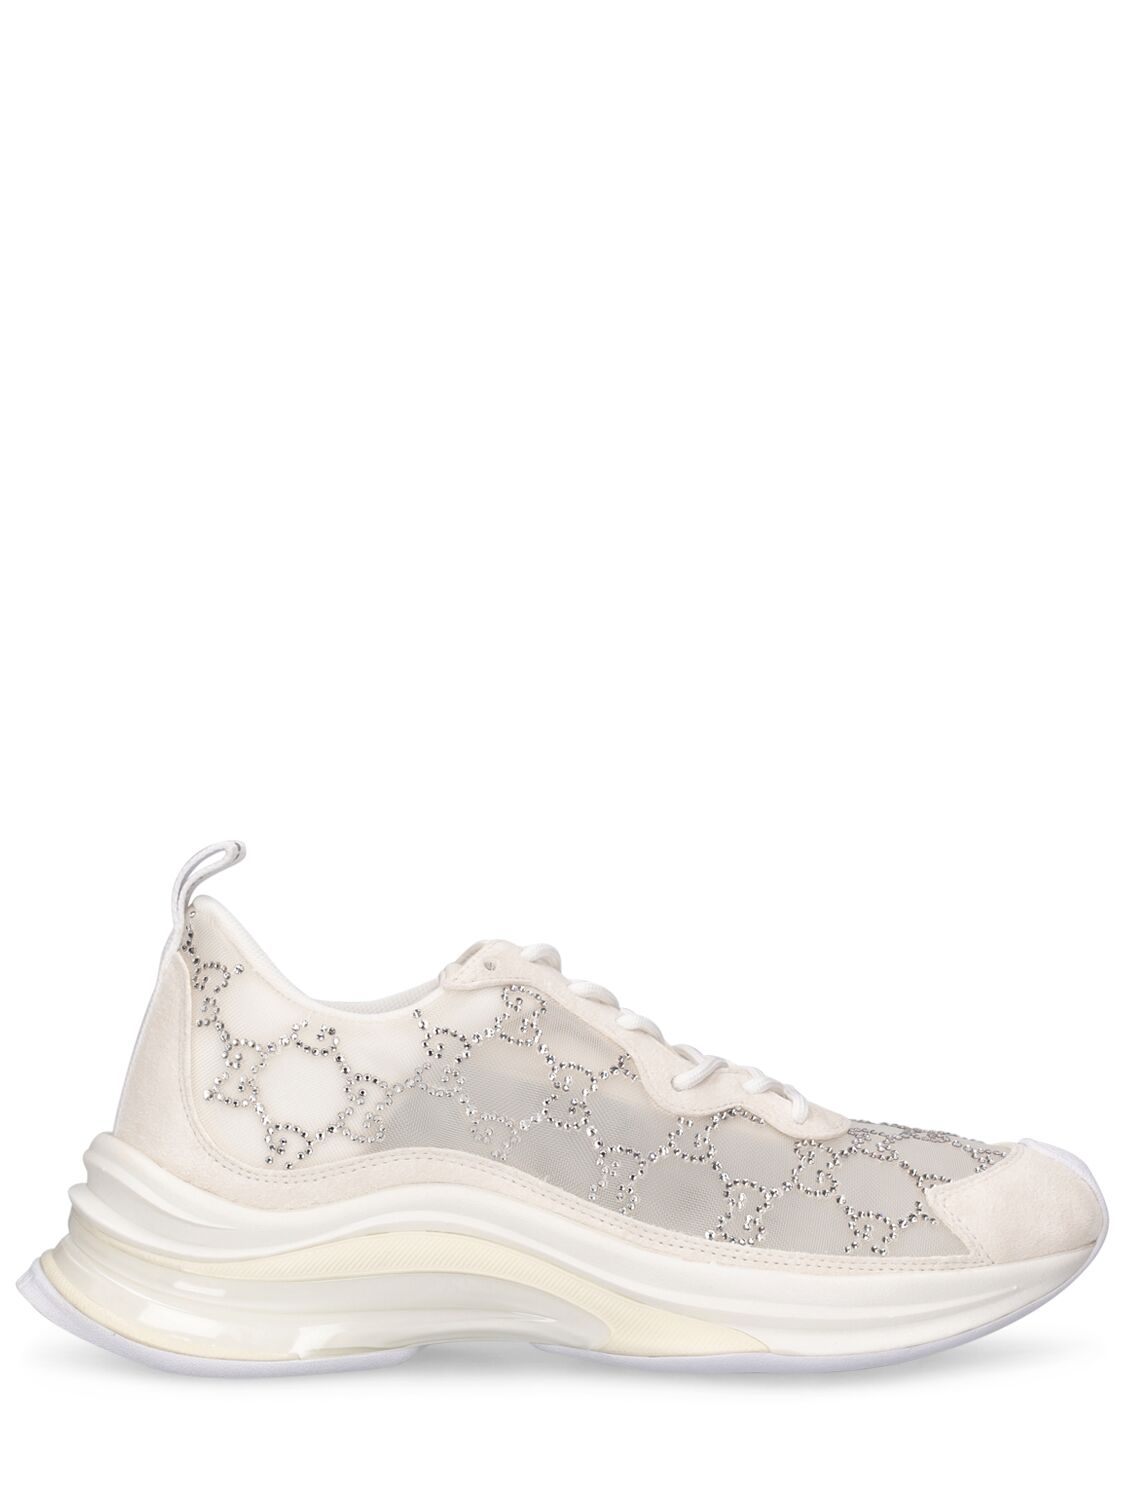 GUCCI 62mm Gucci Run Embellished Sneakers